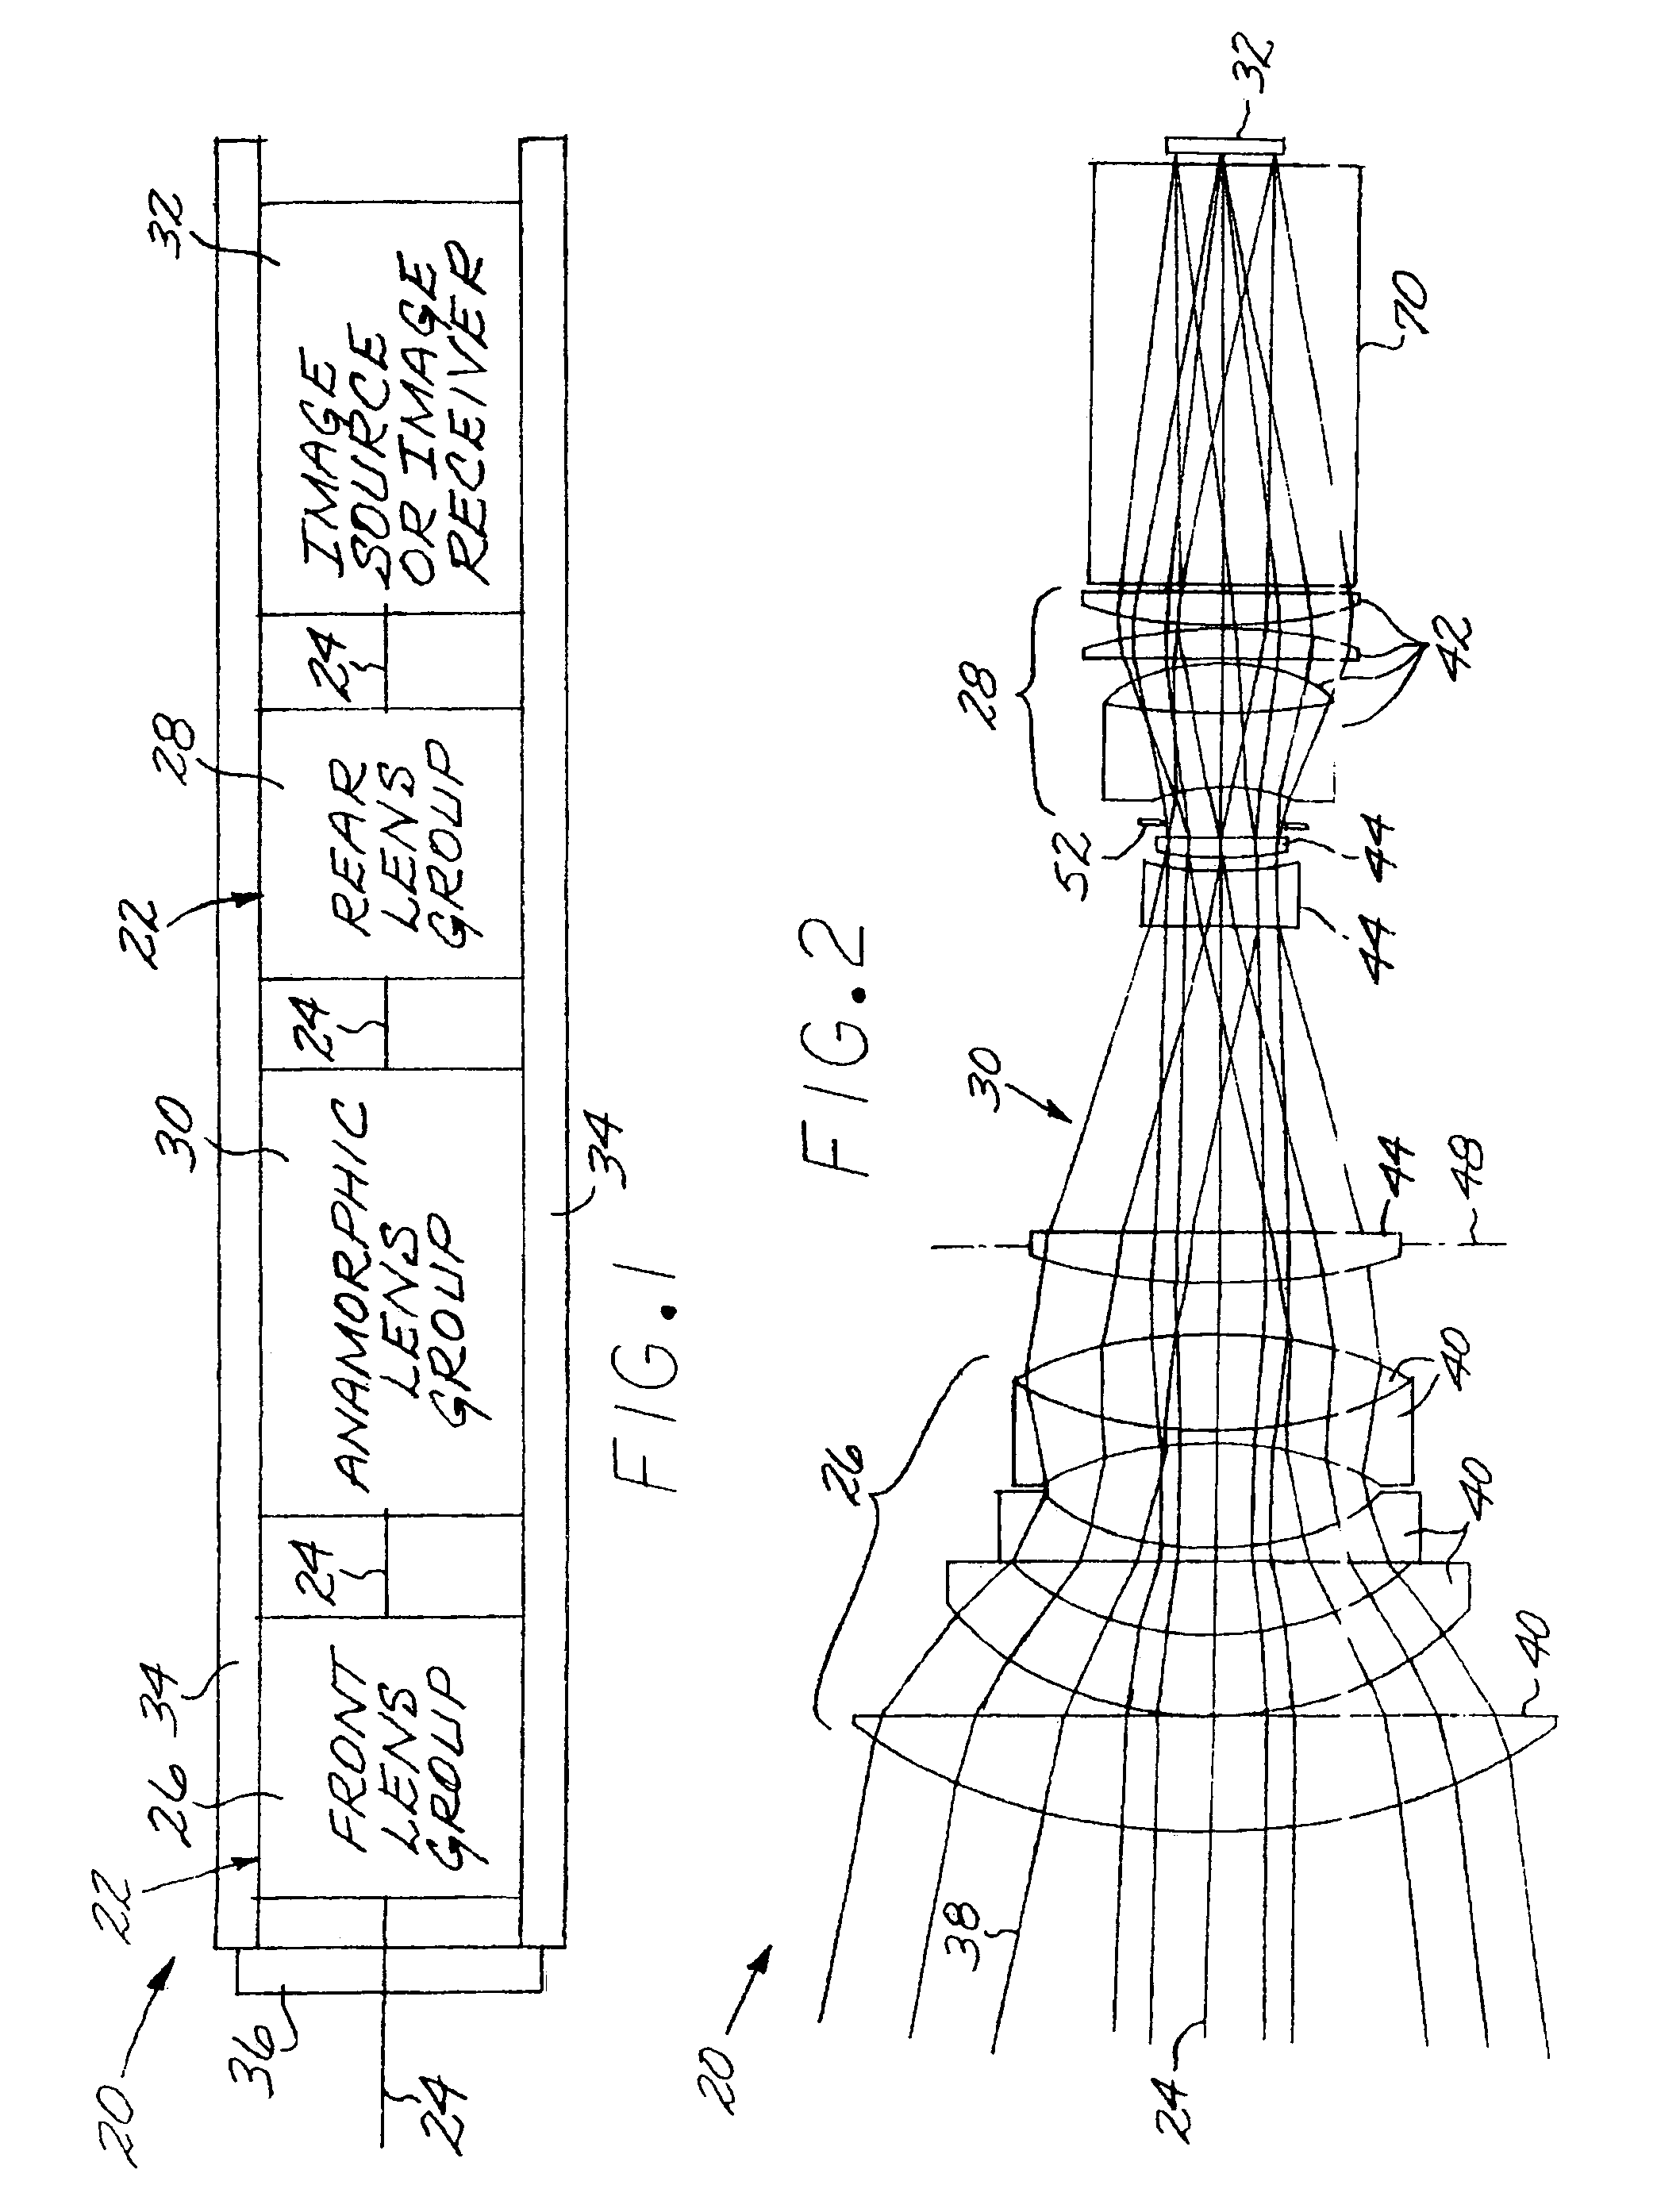 Optical system including an anamorphic lens